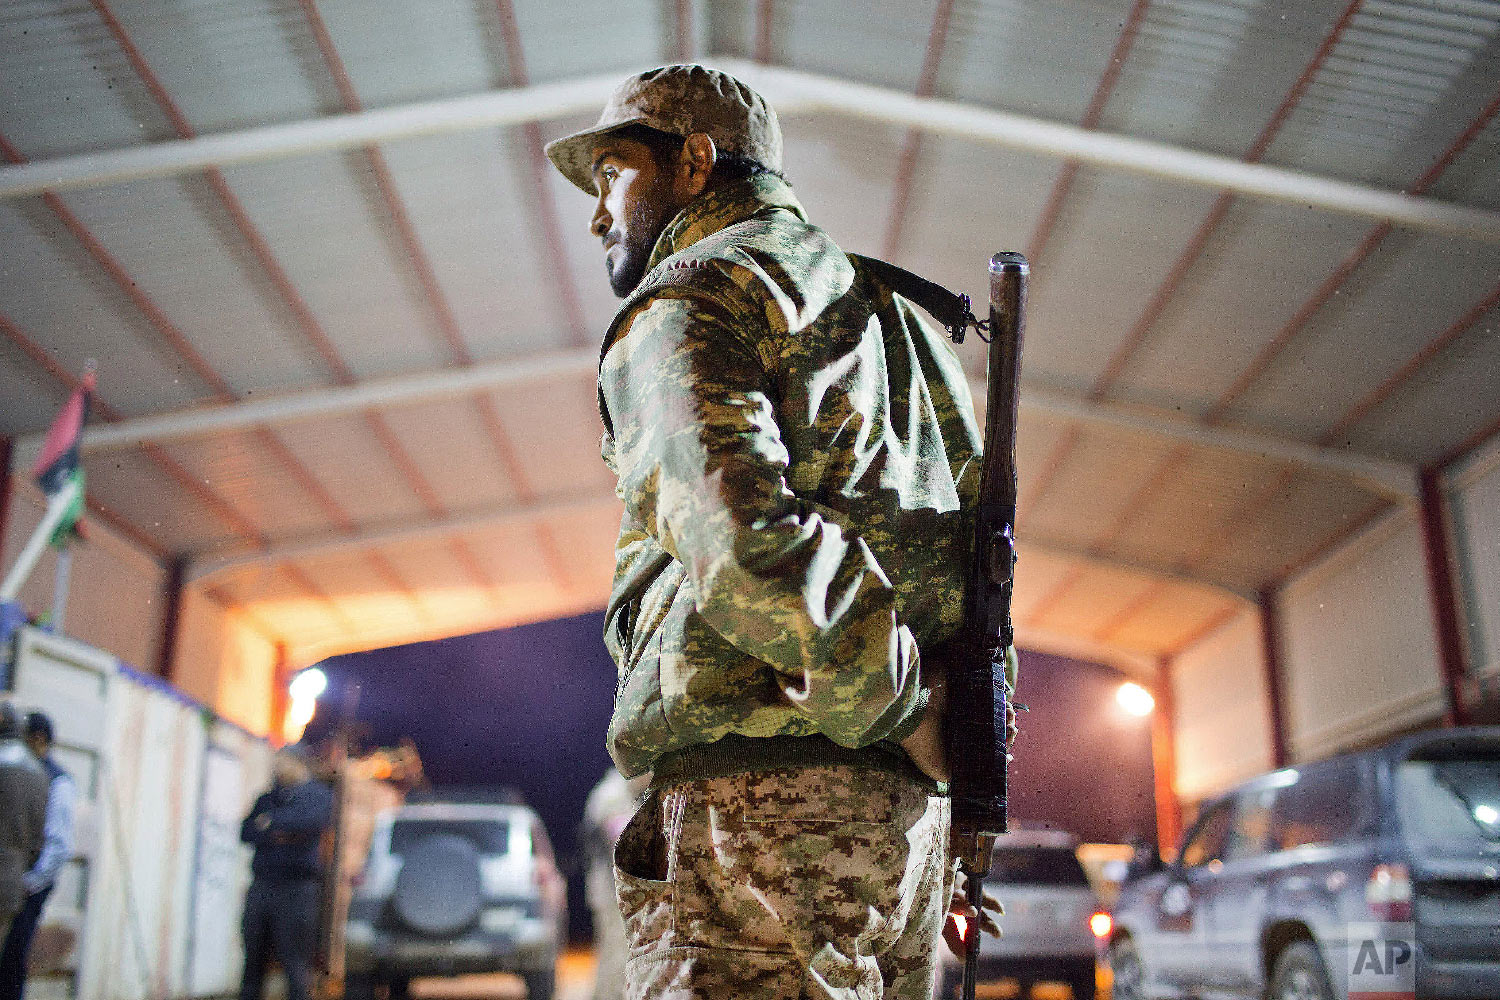  A Libyan military soldier stands guard at the entrance of a town, 110 kilometers (68 miles) from Sirte, Libya, Wednesday, Feb. 18, 2015. (AP Photo/Mohamed Ben Khalifa) 